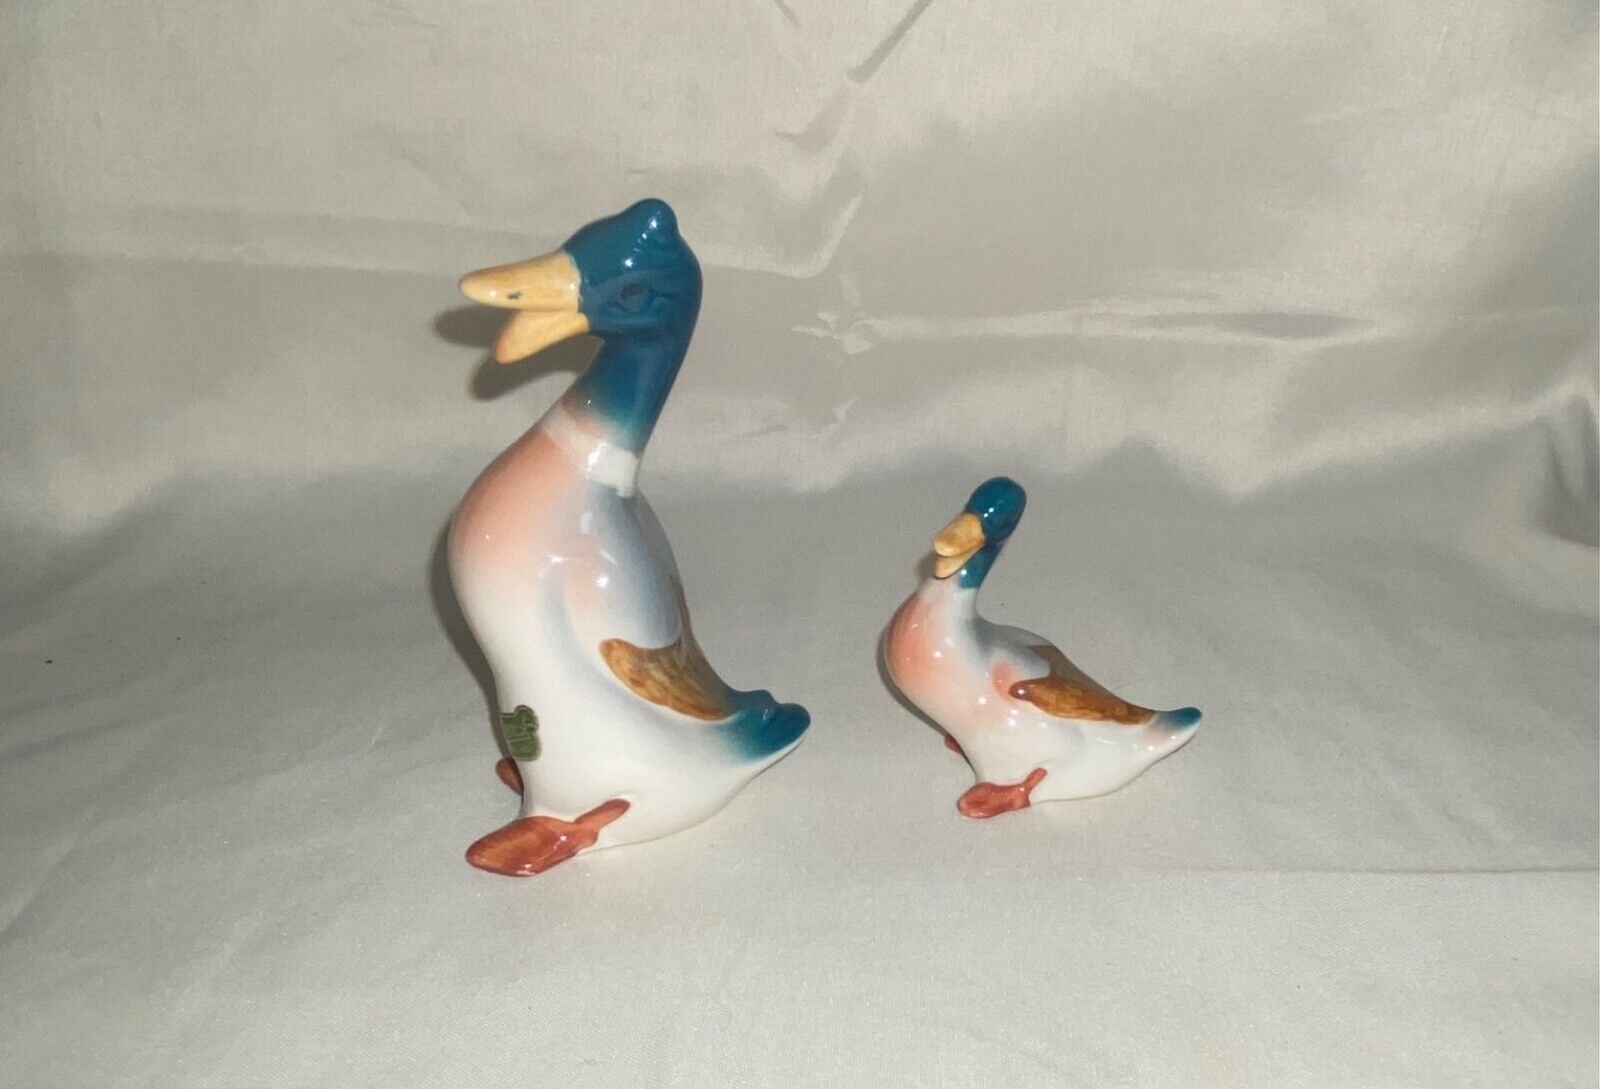 Lot of 2 Beswick Duck Figurines Made in England with Original Label Mint Cond.